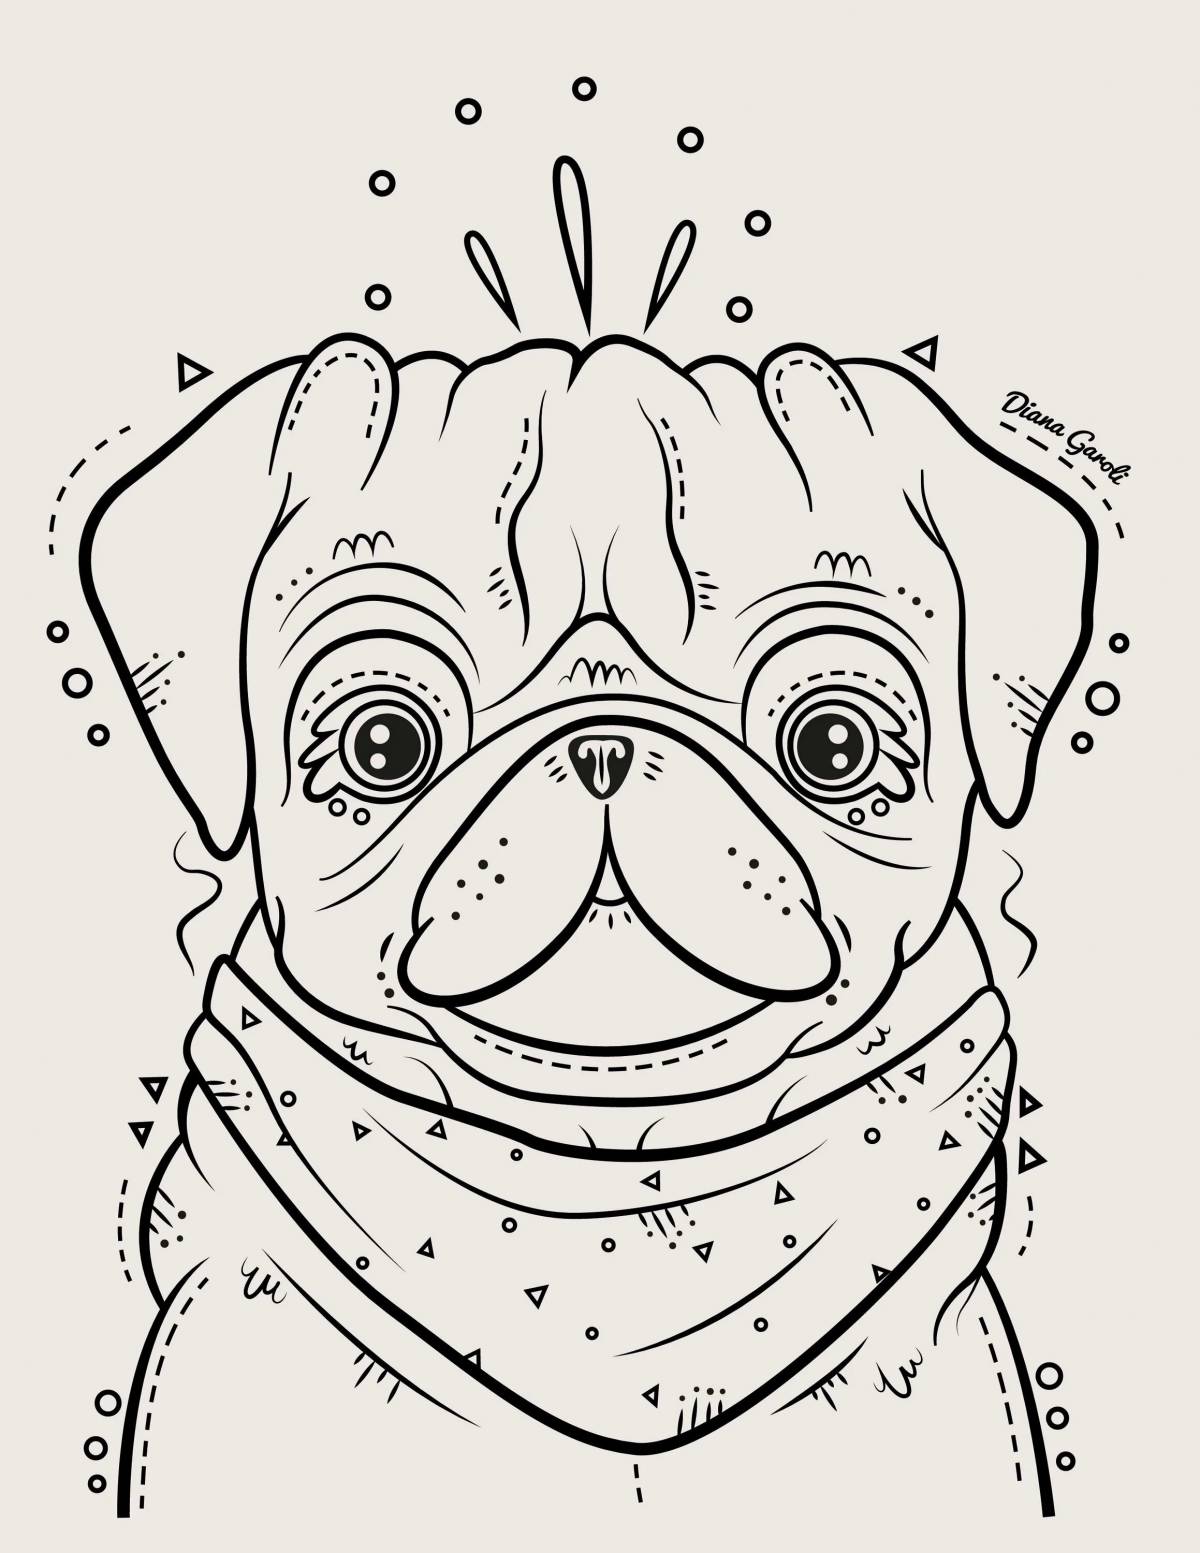 Christmas coloring of a pug with scallops